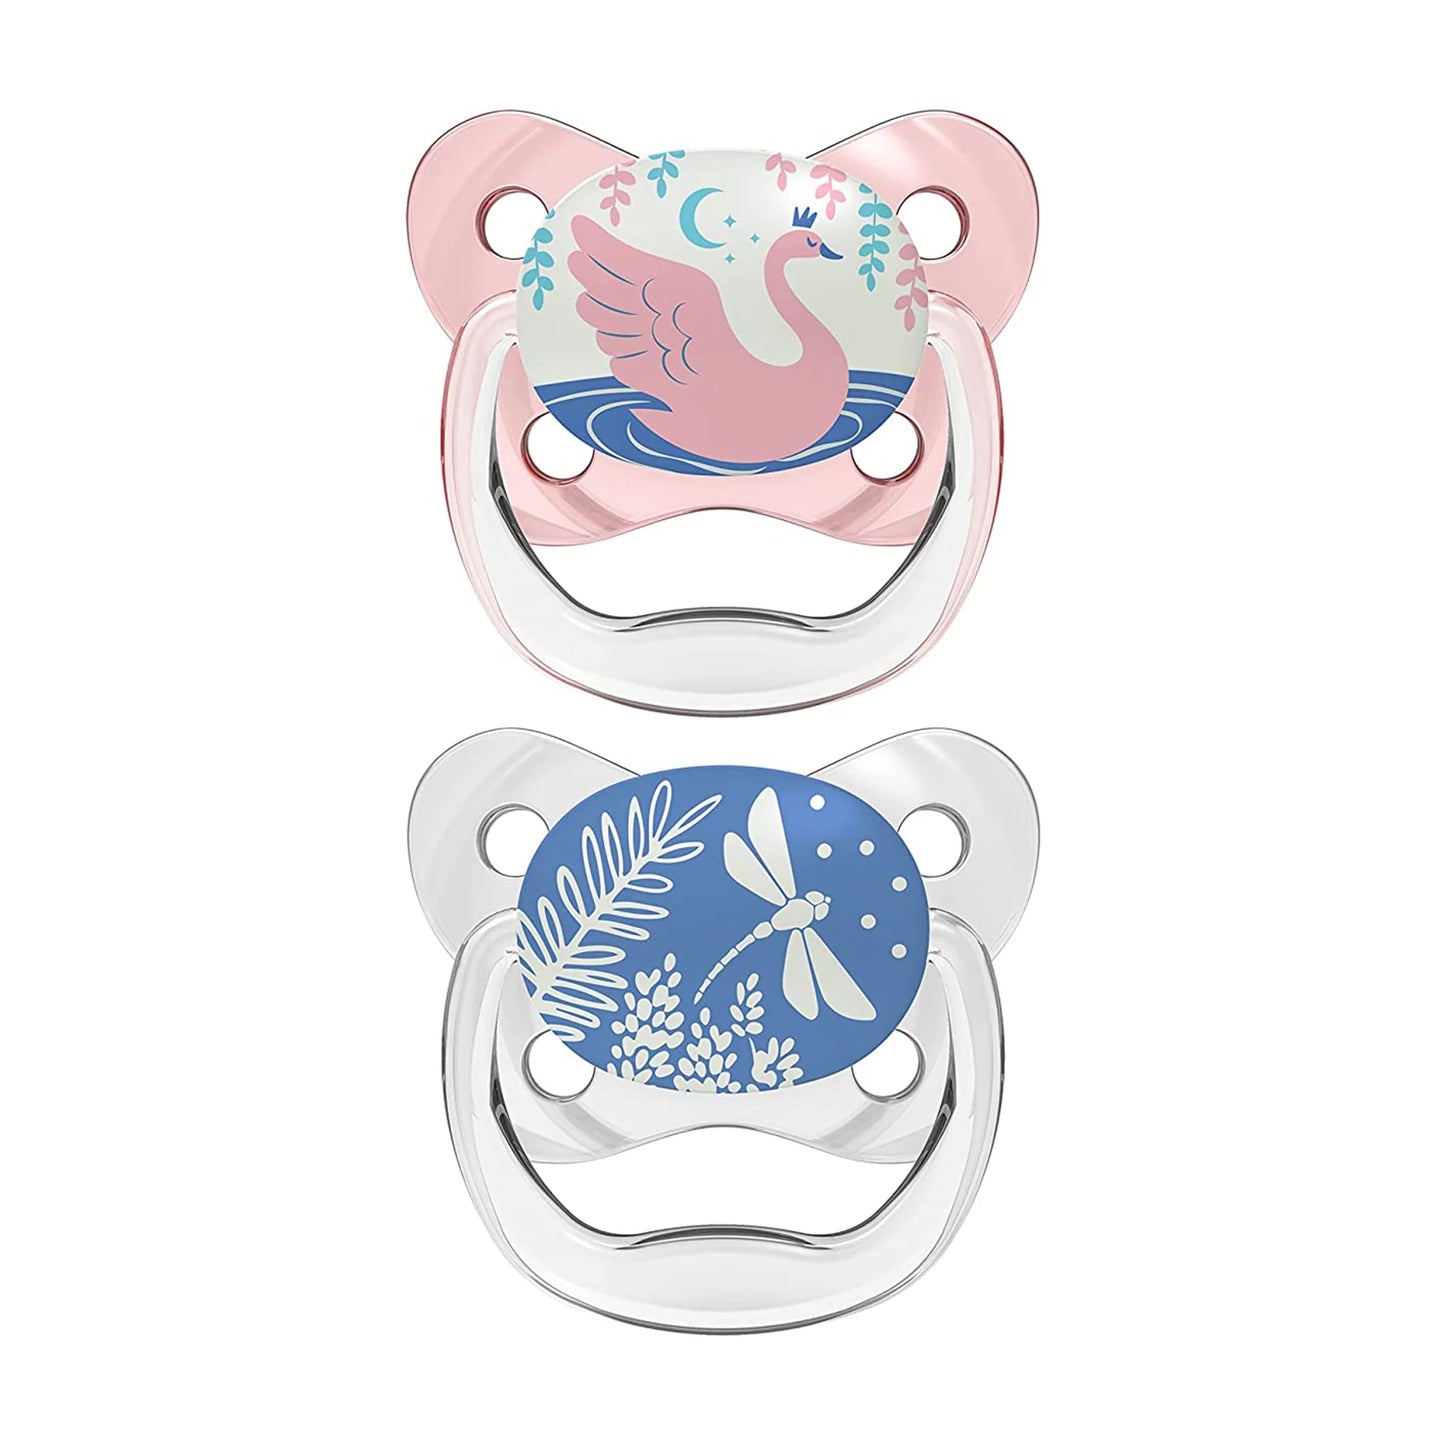 Dr. Brown's Prevent Stage 1 Glow In The Dark Butterfly Shield Pacifier - Pack of 2 - Pink